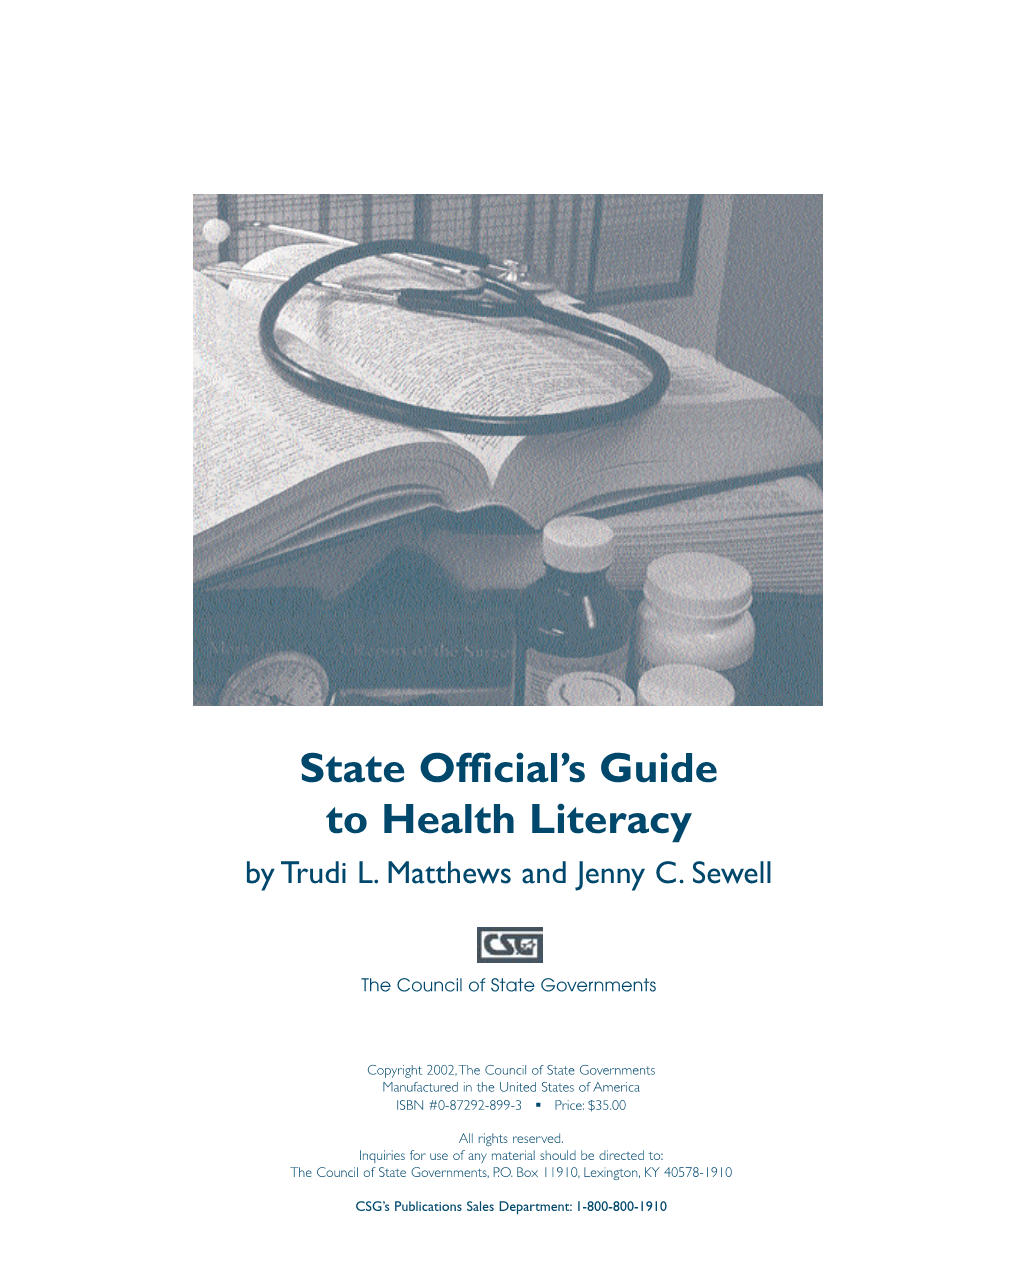 State Official's Guide to Health Literacy